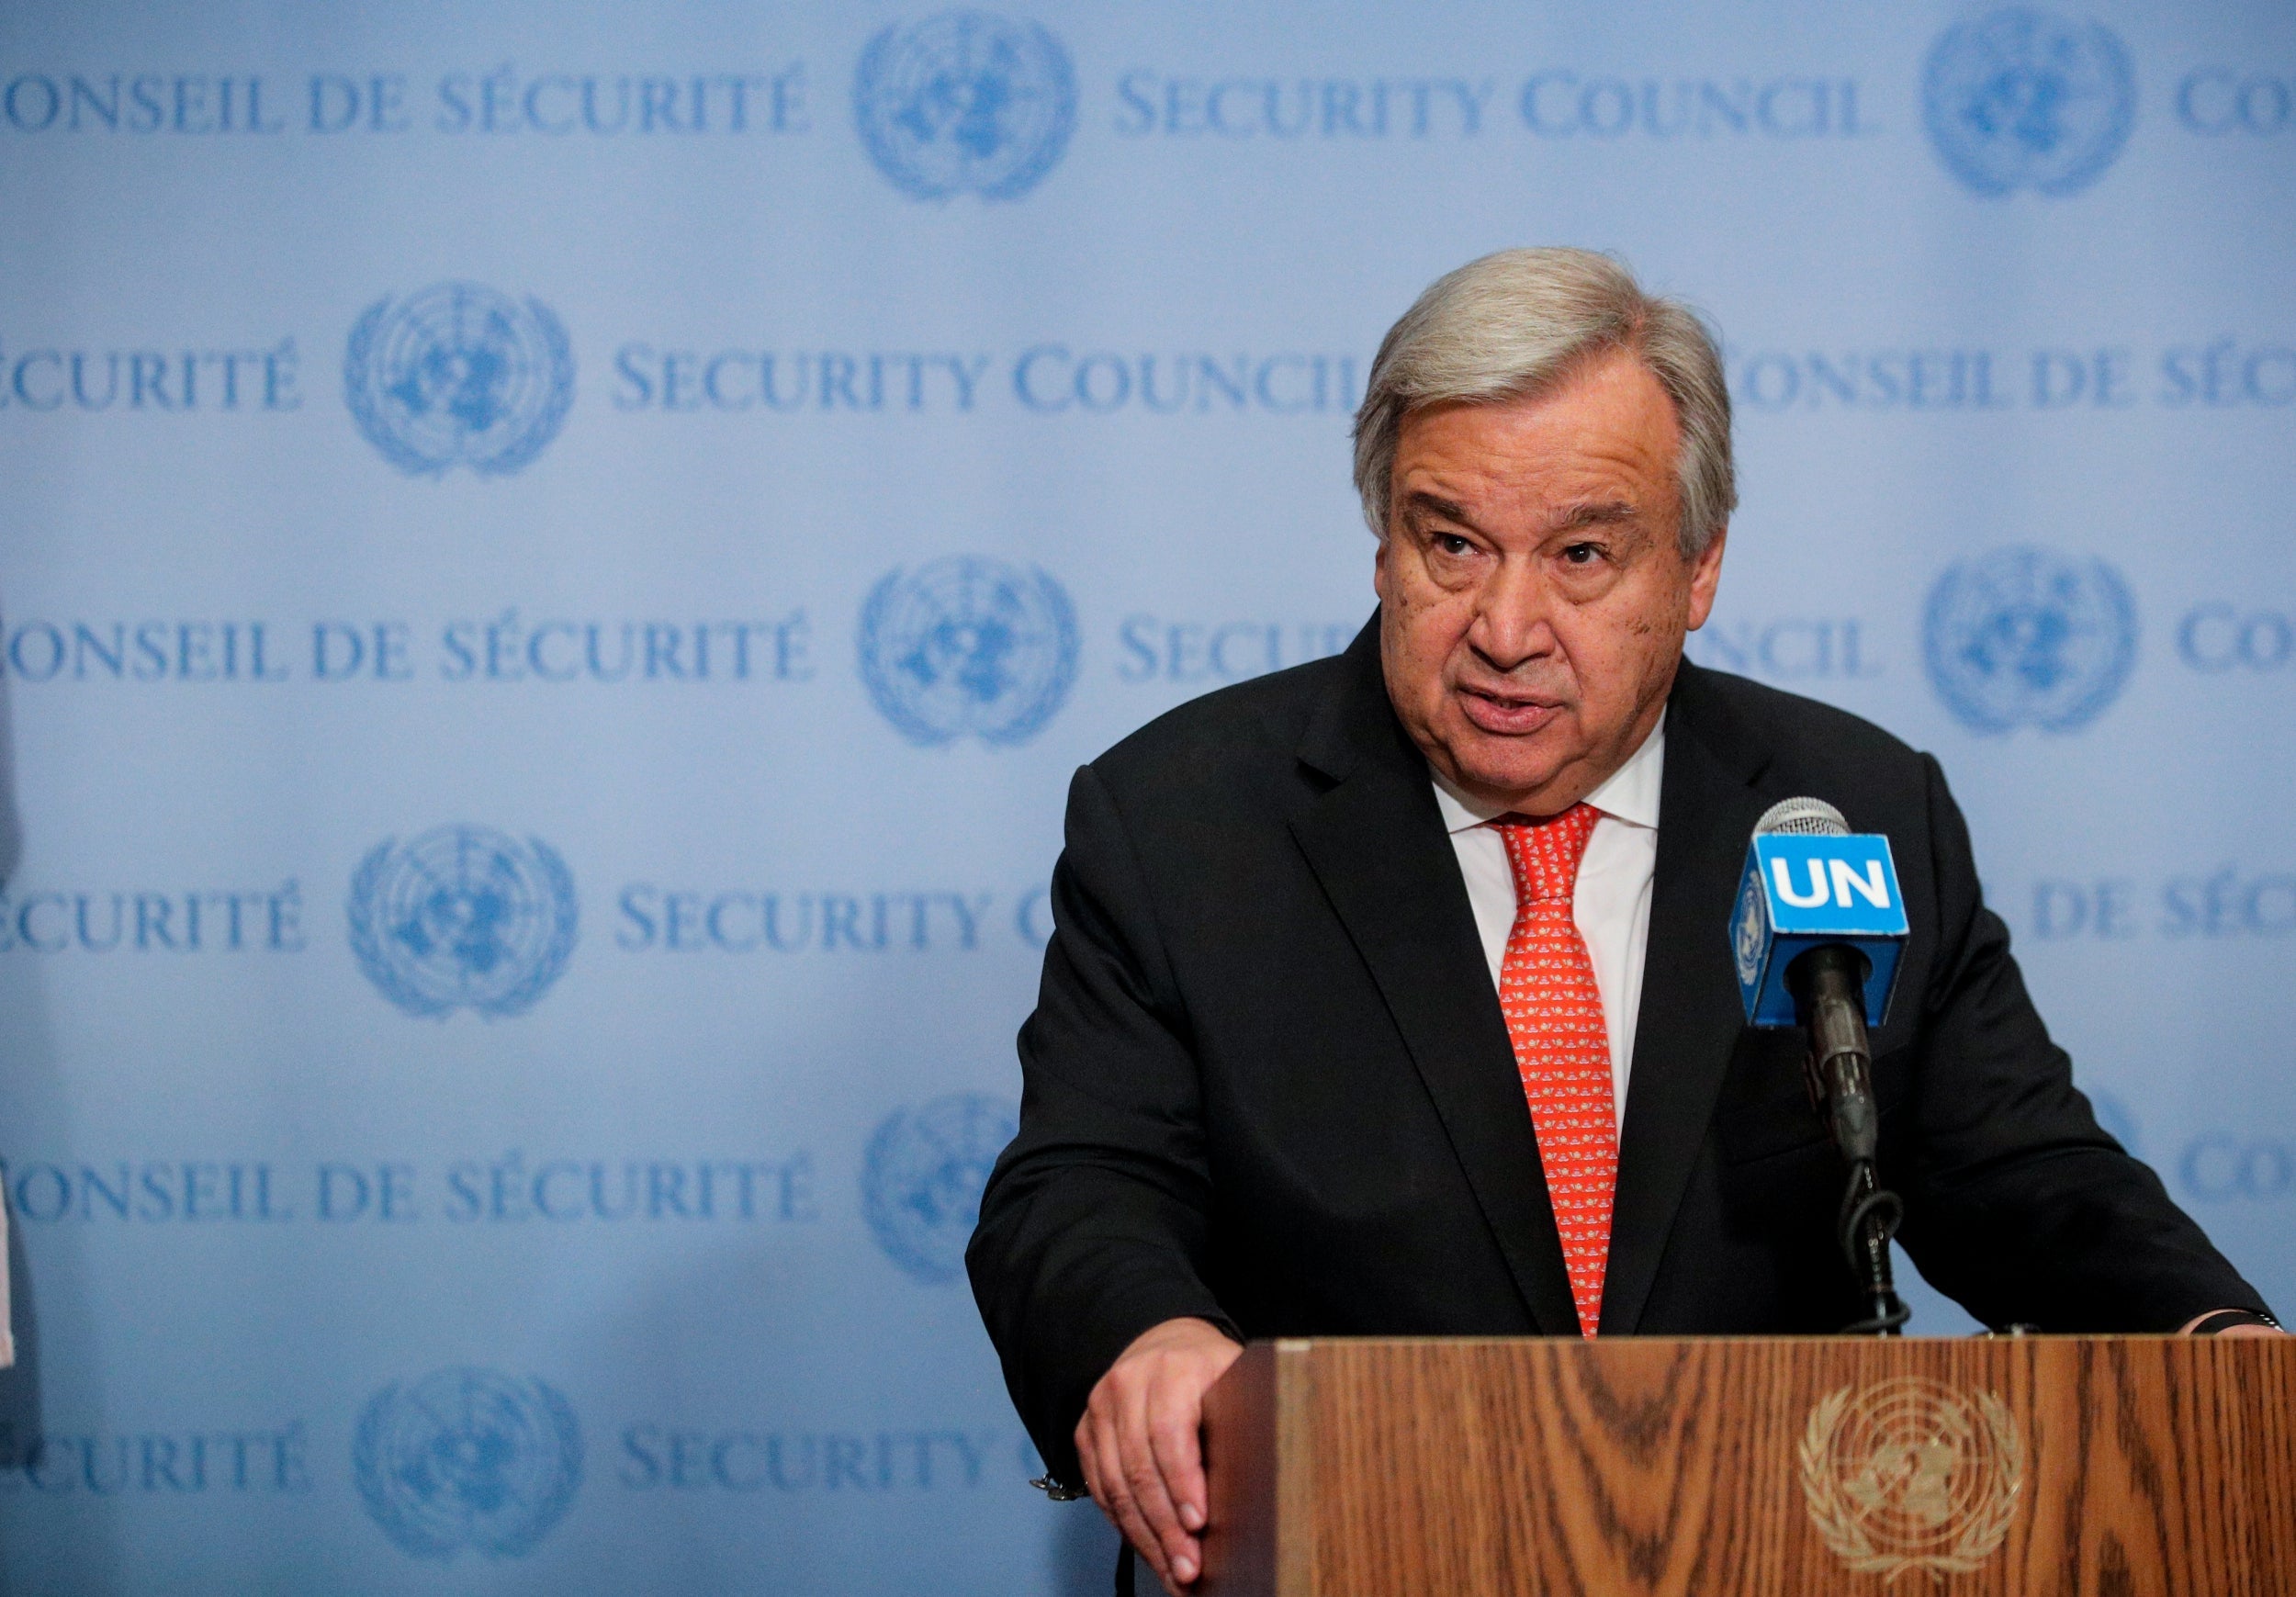 The UN chief has urged the two nations "to avoid destabilizing developments" and agree on a new arms control path.